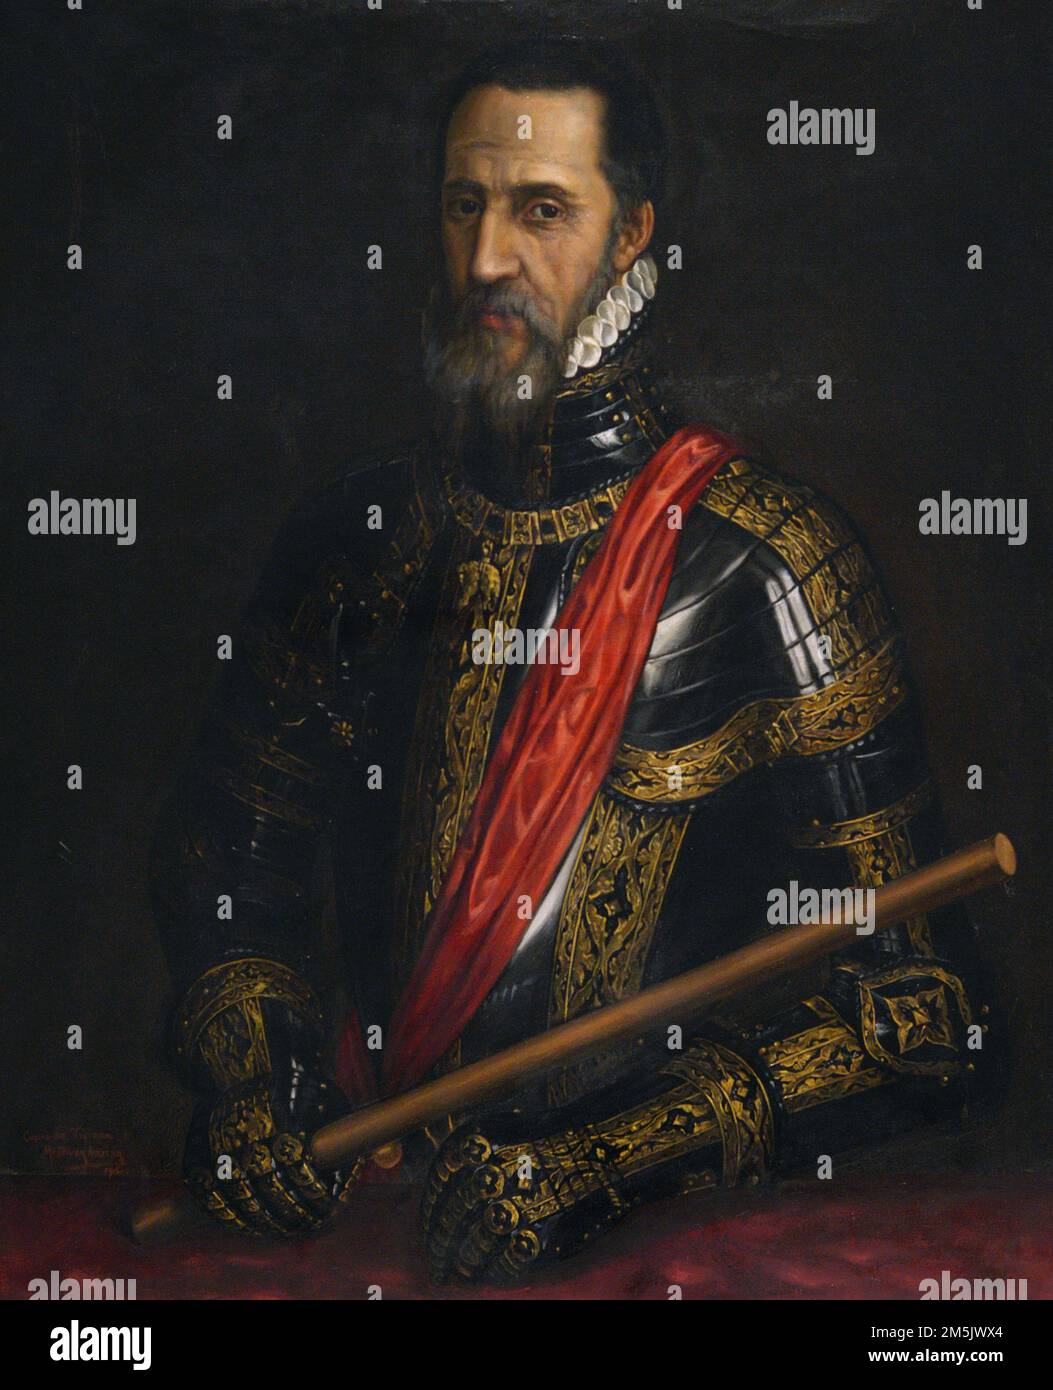 Fernando Alvarez de Toledo y Pimentel (1507-1582). Spanish military. 3rd Duke of Alba. Governor of Milan, Viceroy of Naples, Governor of the Netherlands and 1st Viceroy of Portugal and the Algarves. Portrait of the Captain General don Fernando Alvarez de Toledo y Pimentel, Great Duke of Alba. Oil on canvas by Mariano Oliver Aznar (1863-1927), 1915. Army Museum.  Toledo, Spain. Stock Photo